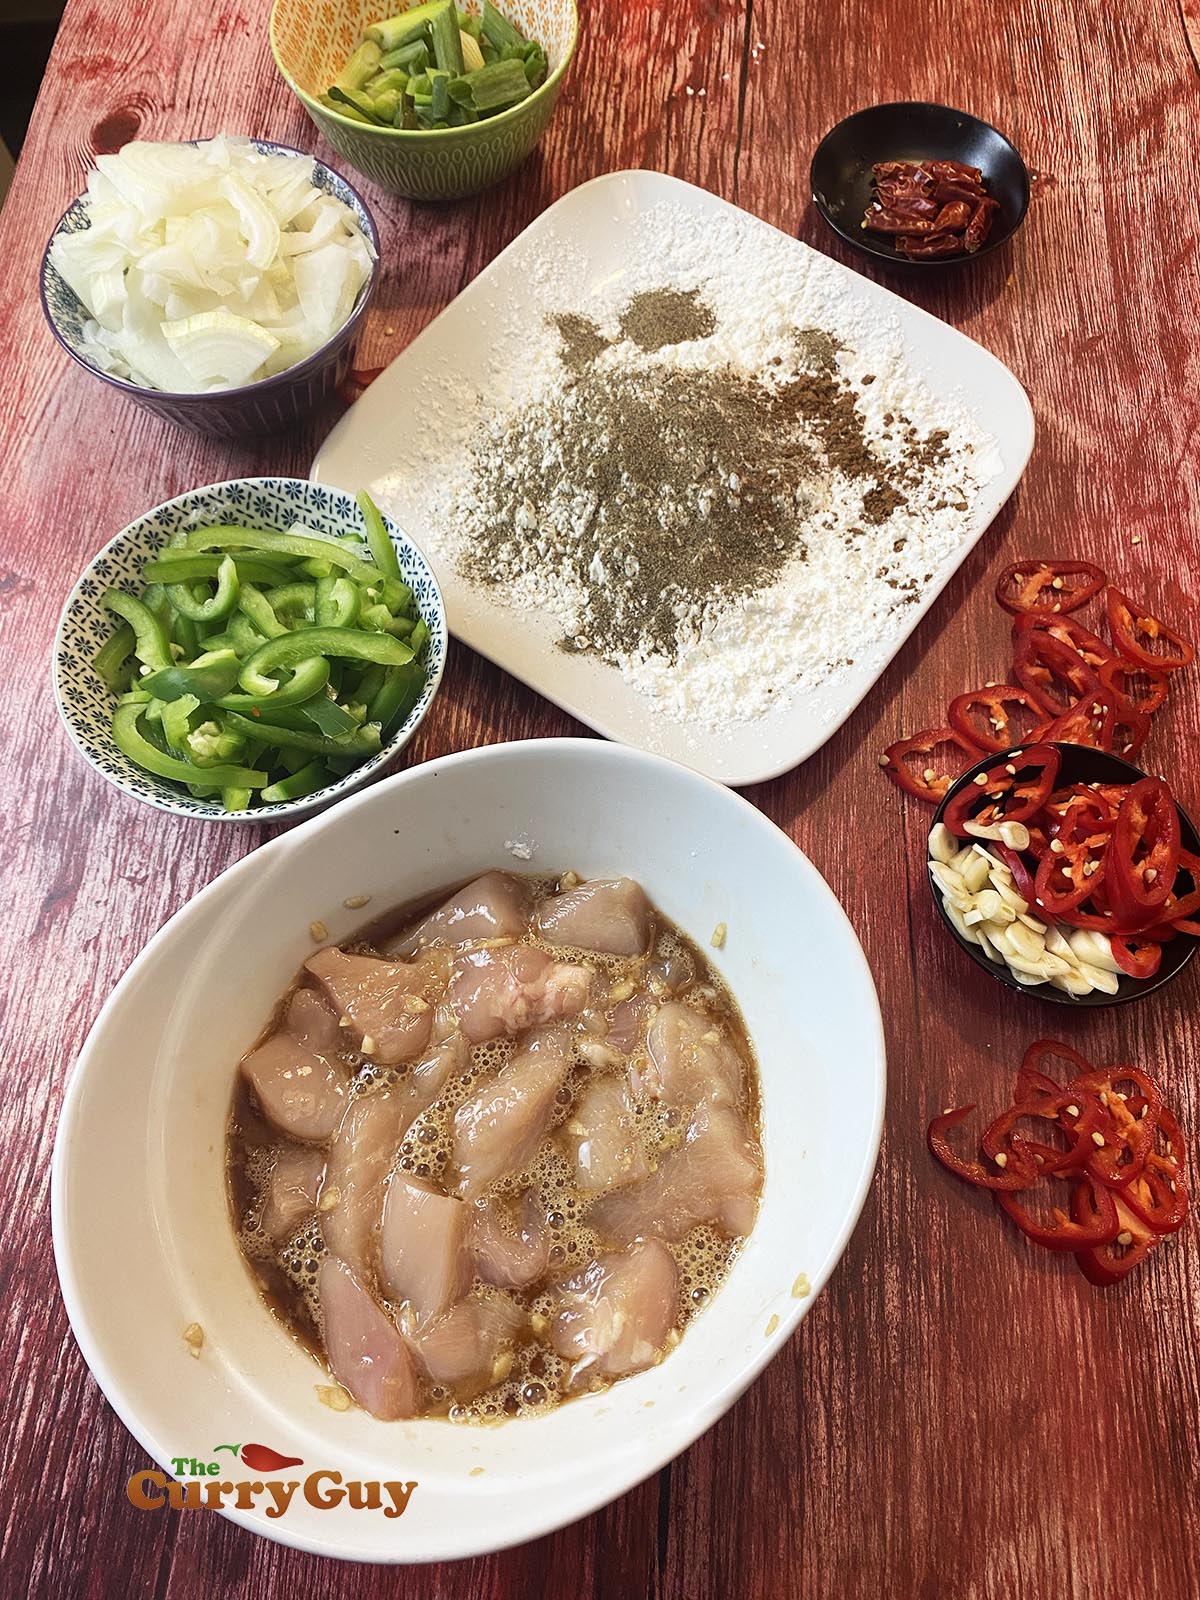 Ingredients for salt and pepper chicken